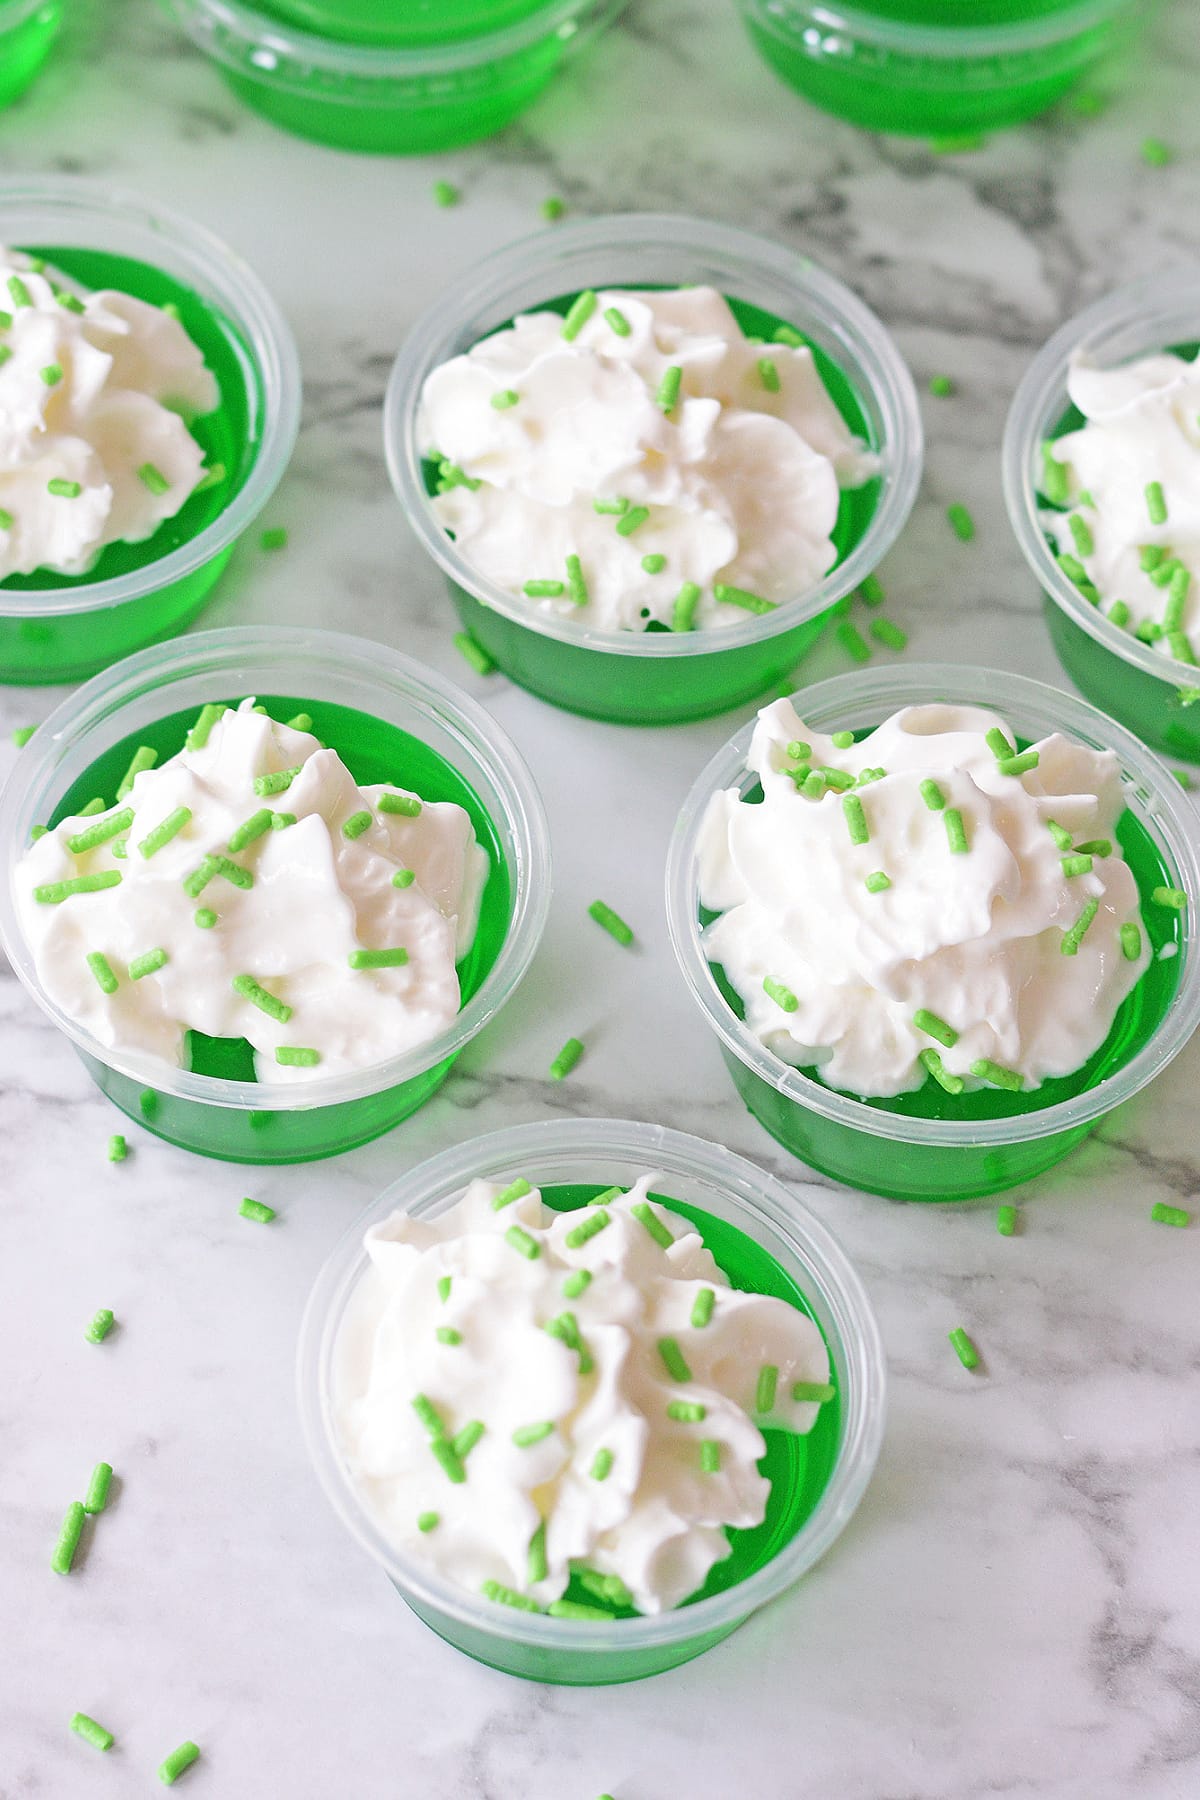 St. Patrick's Jello Shots with whipped cream